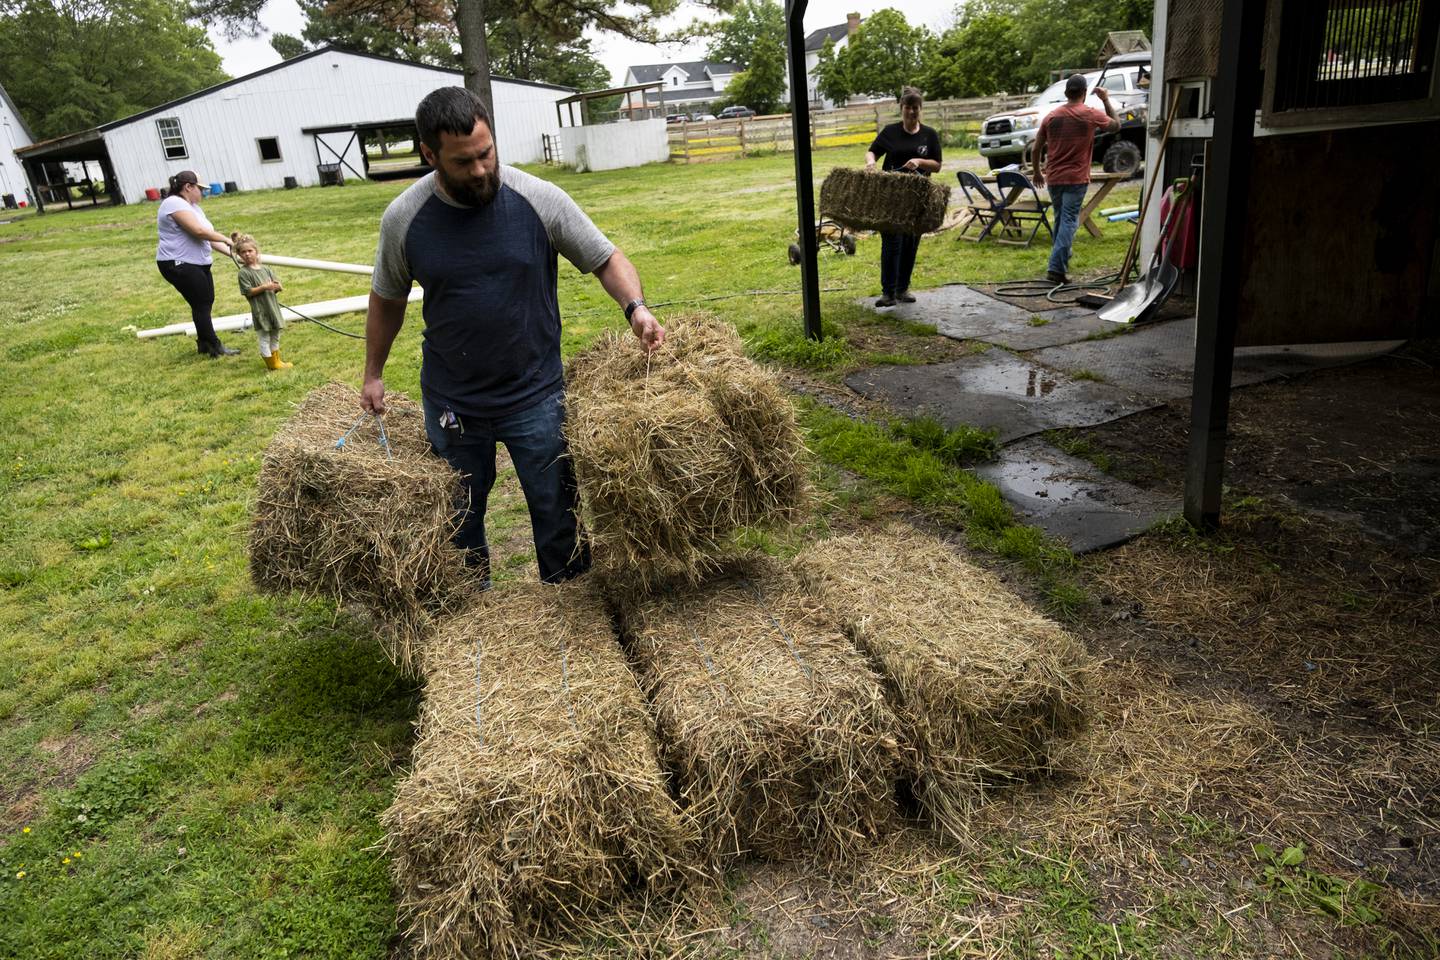 Jarred Bragg helps move bales of hay during a clean up event for Trails of Purpose, May 20, 2023, in Chesapeake, Va., ahead of the opening of their new location in Virginia Beach, Va.